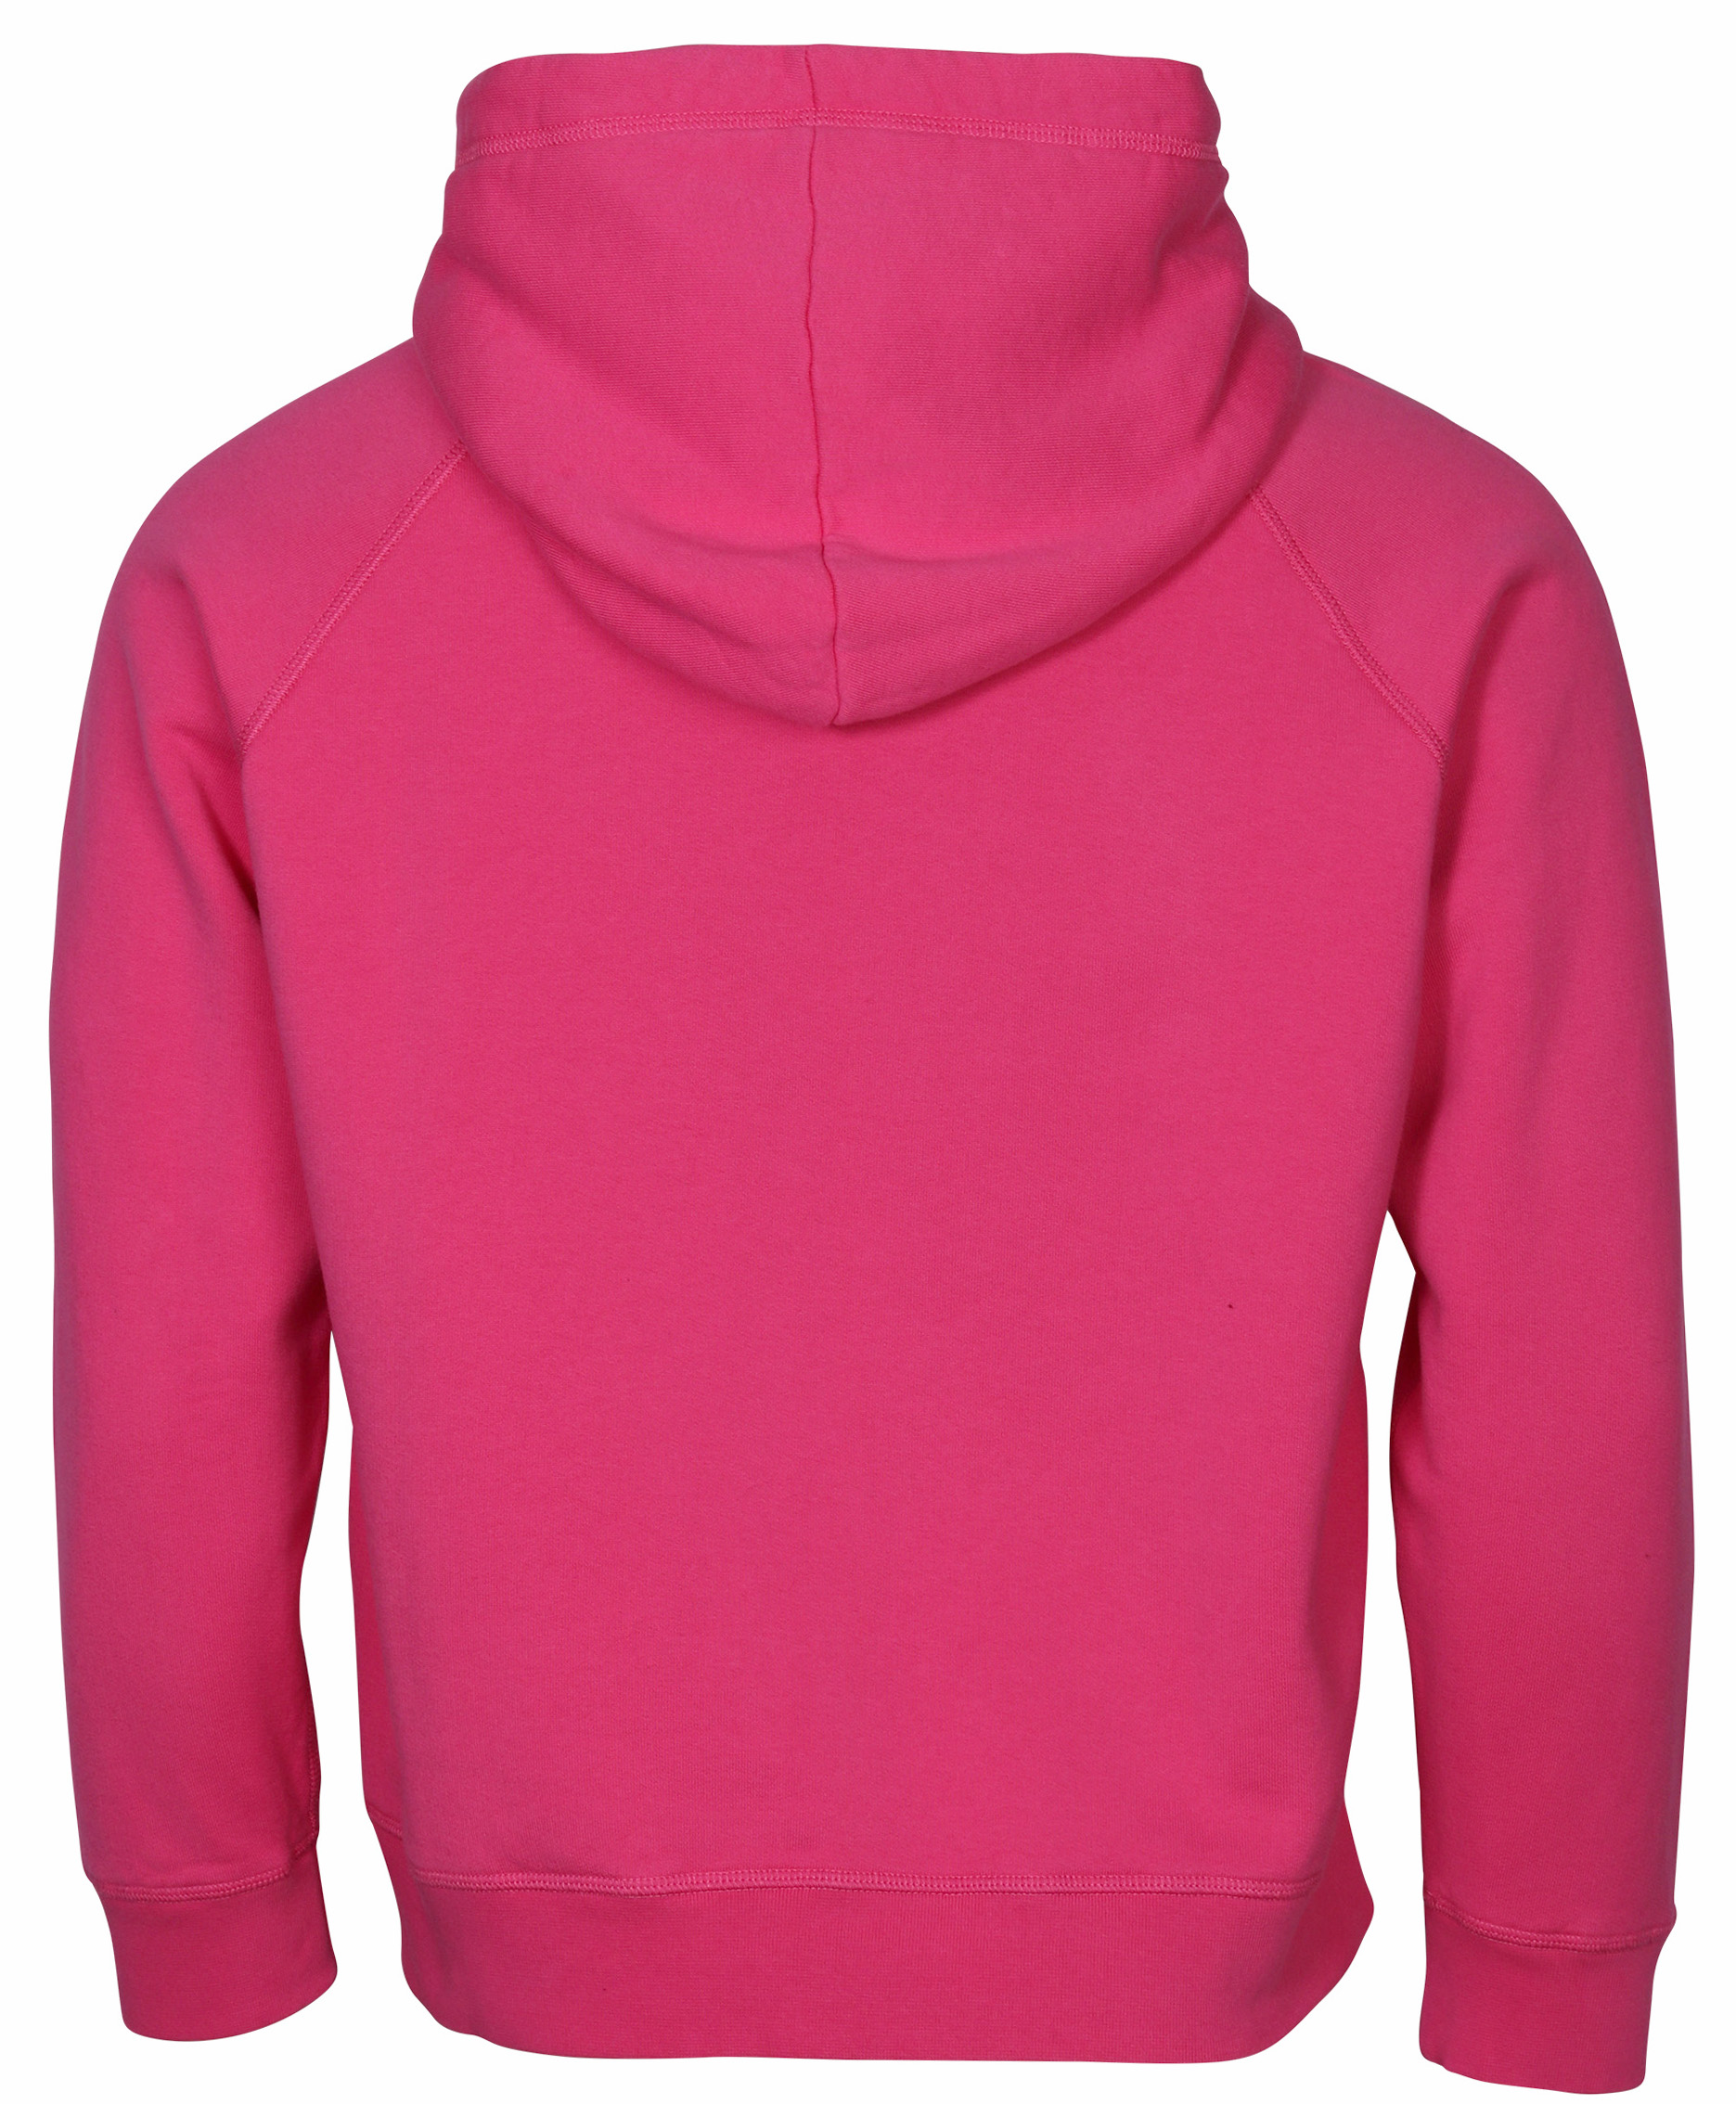 Unisex Dsquared Icon Hoodie Pink S